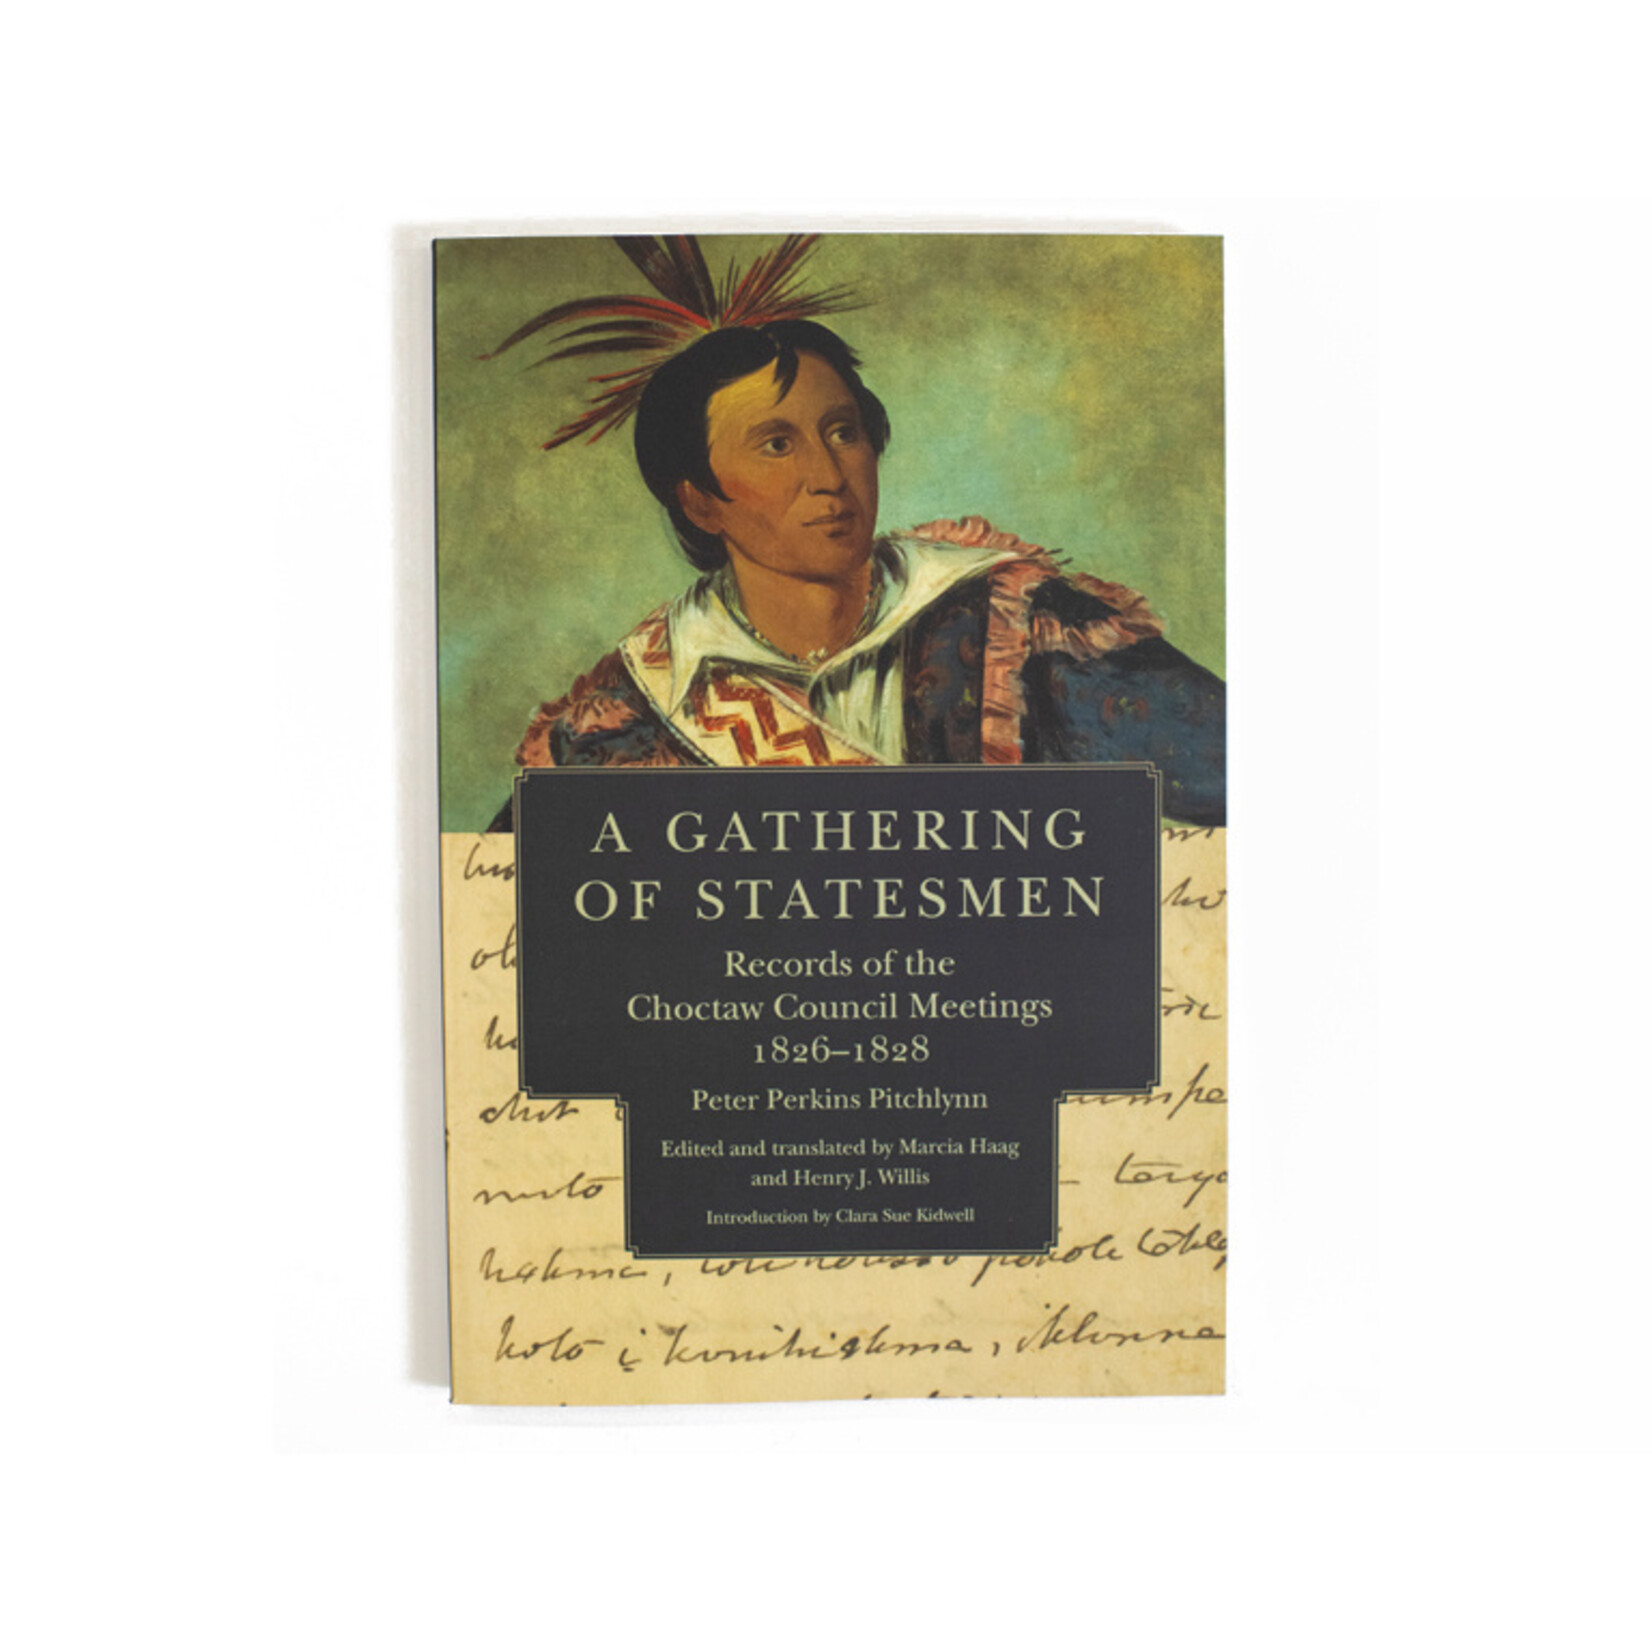 A Gathering of Statesmen: Records of the Choctaw Council Meetings 1826–1828 Paperback by Peter Perkins Pitchlynn (Author)